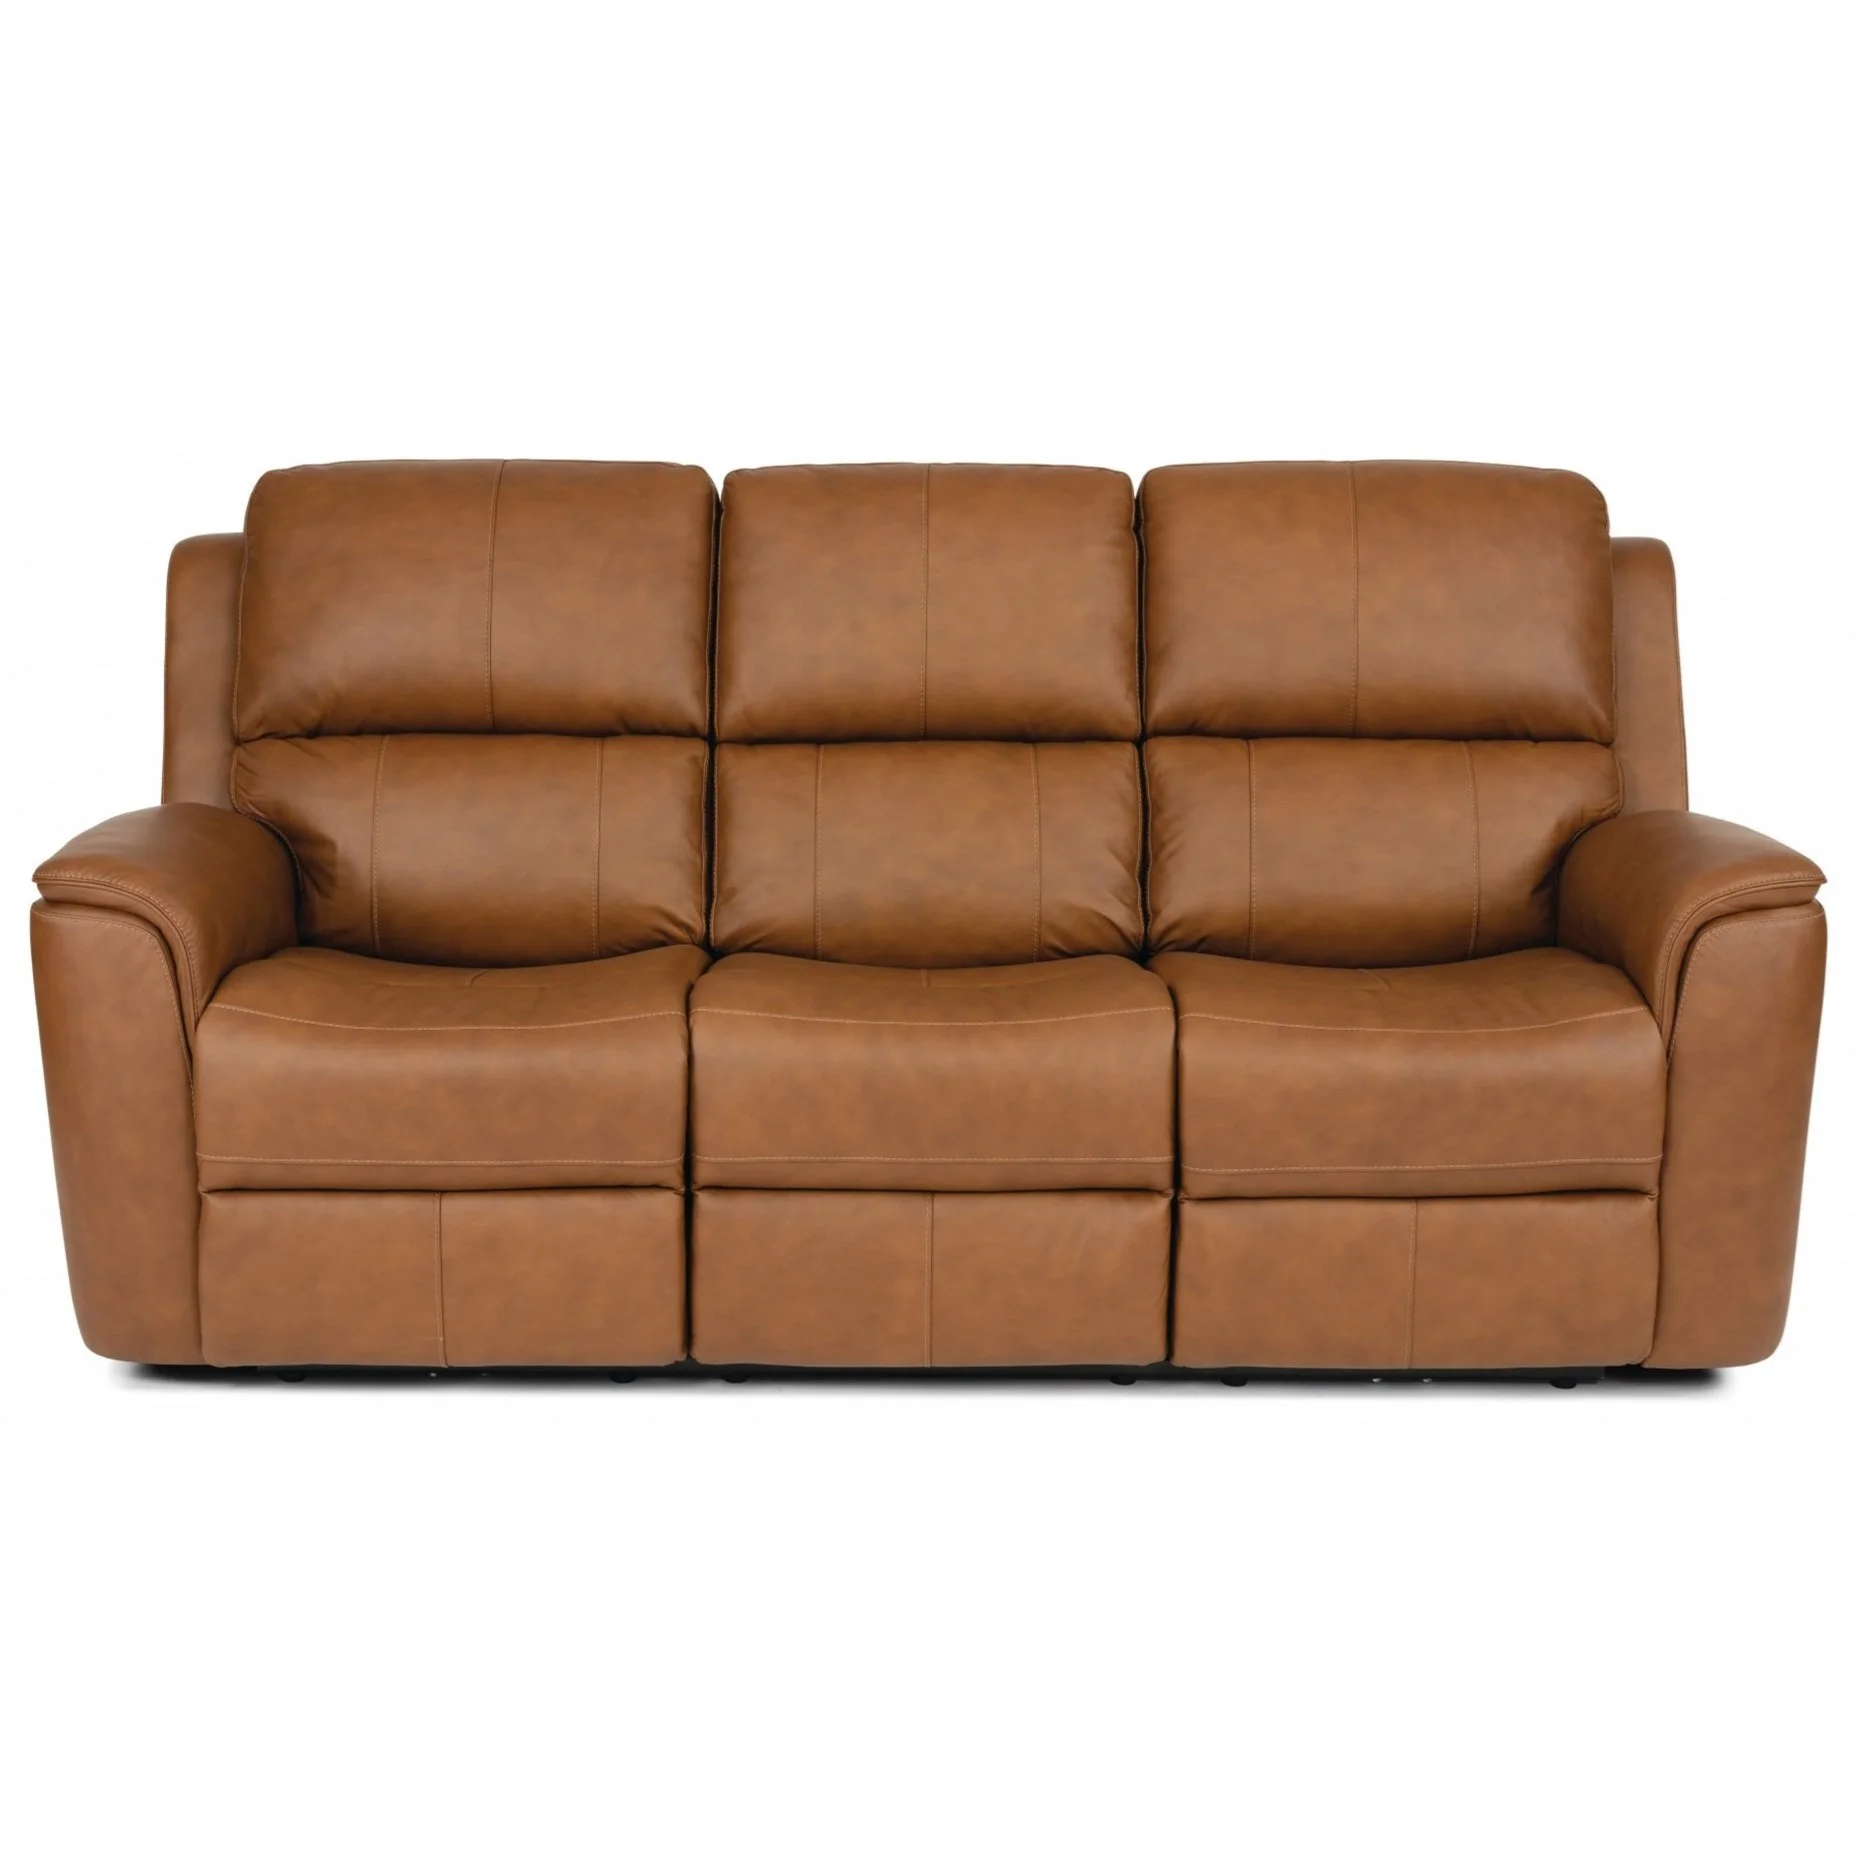 Recliner Sofa Home Theater Seating with Lumbar Support Manual Push Back  Recliners,PU Leather